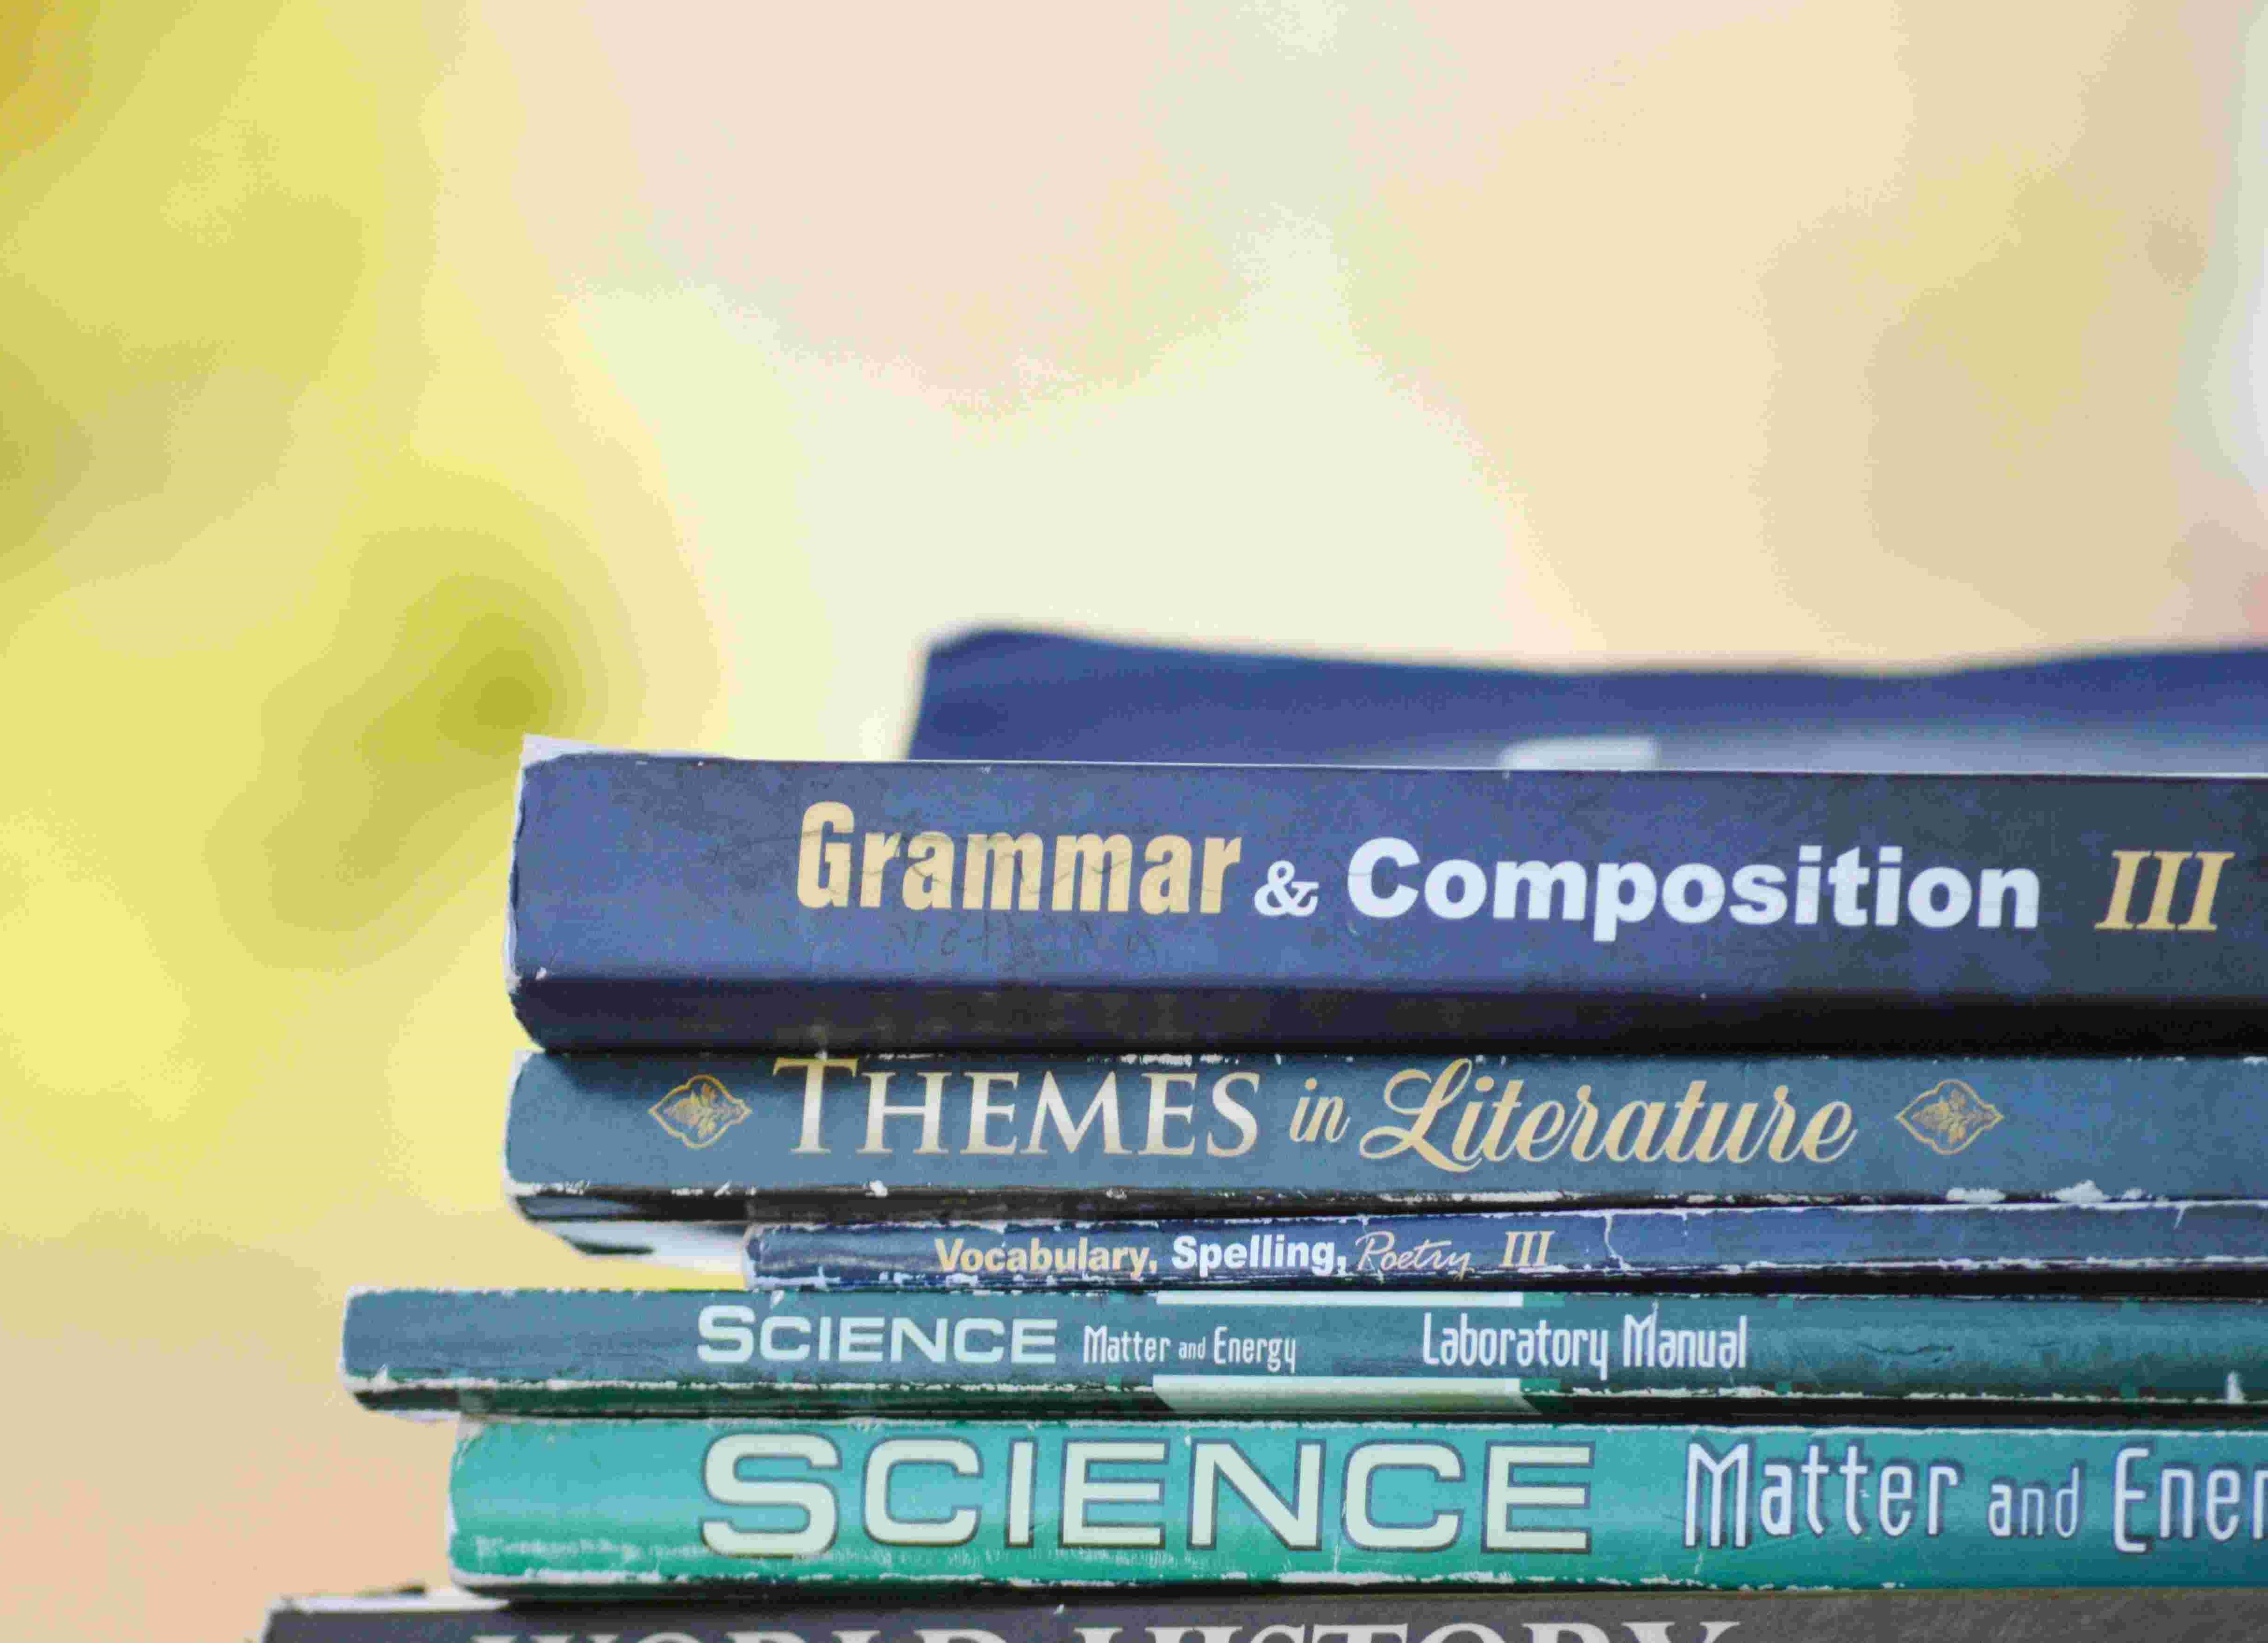 English grammar books and science text books